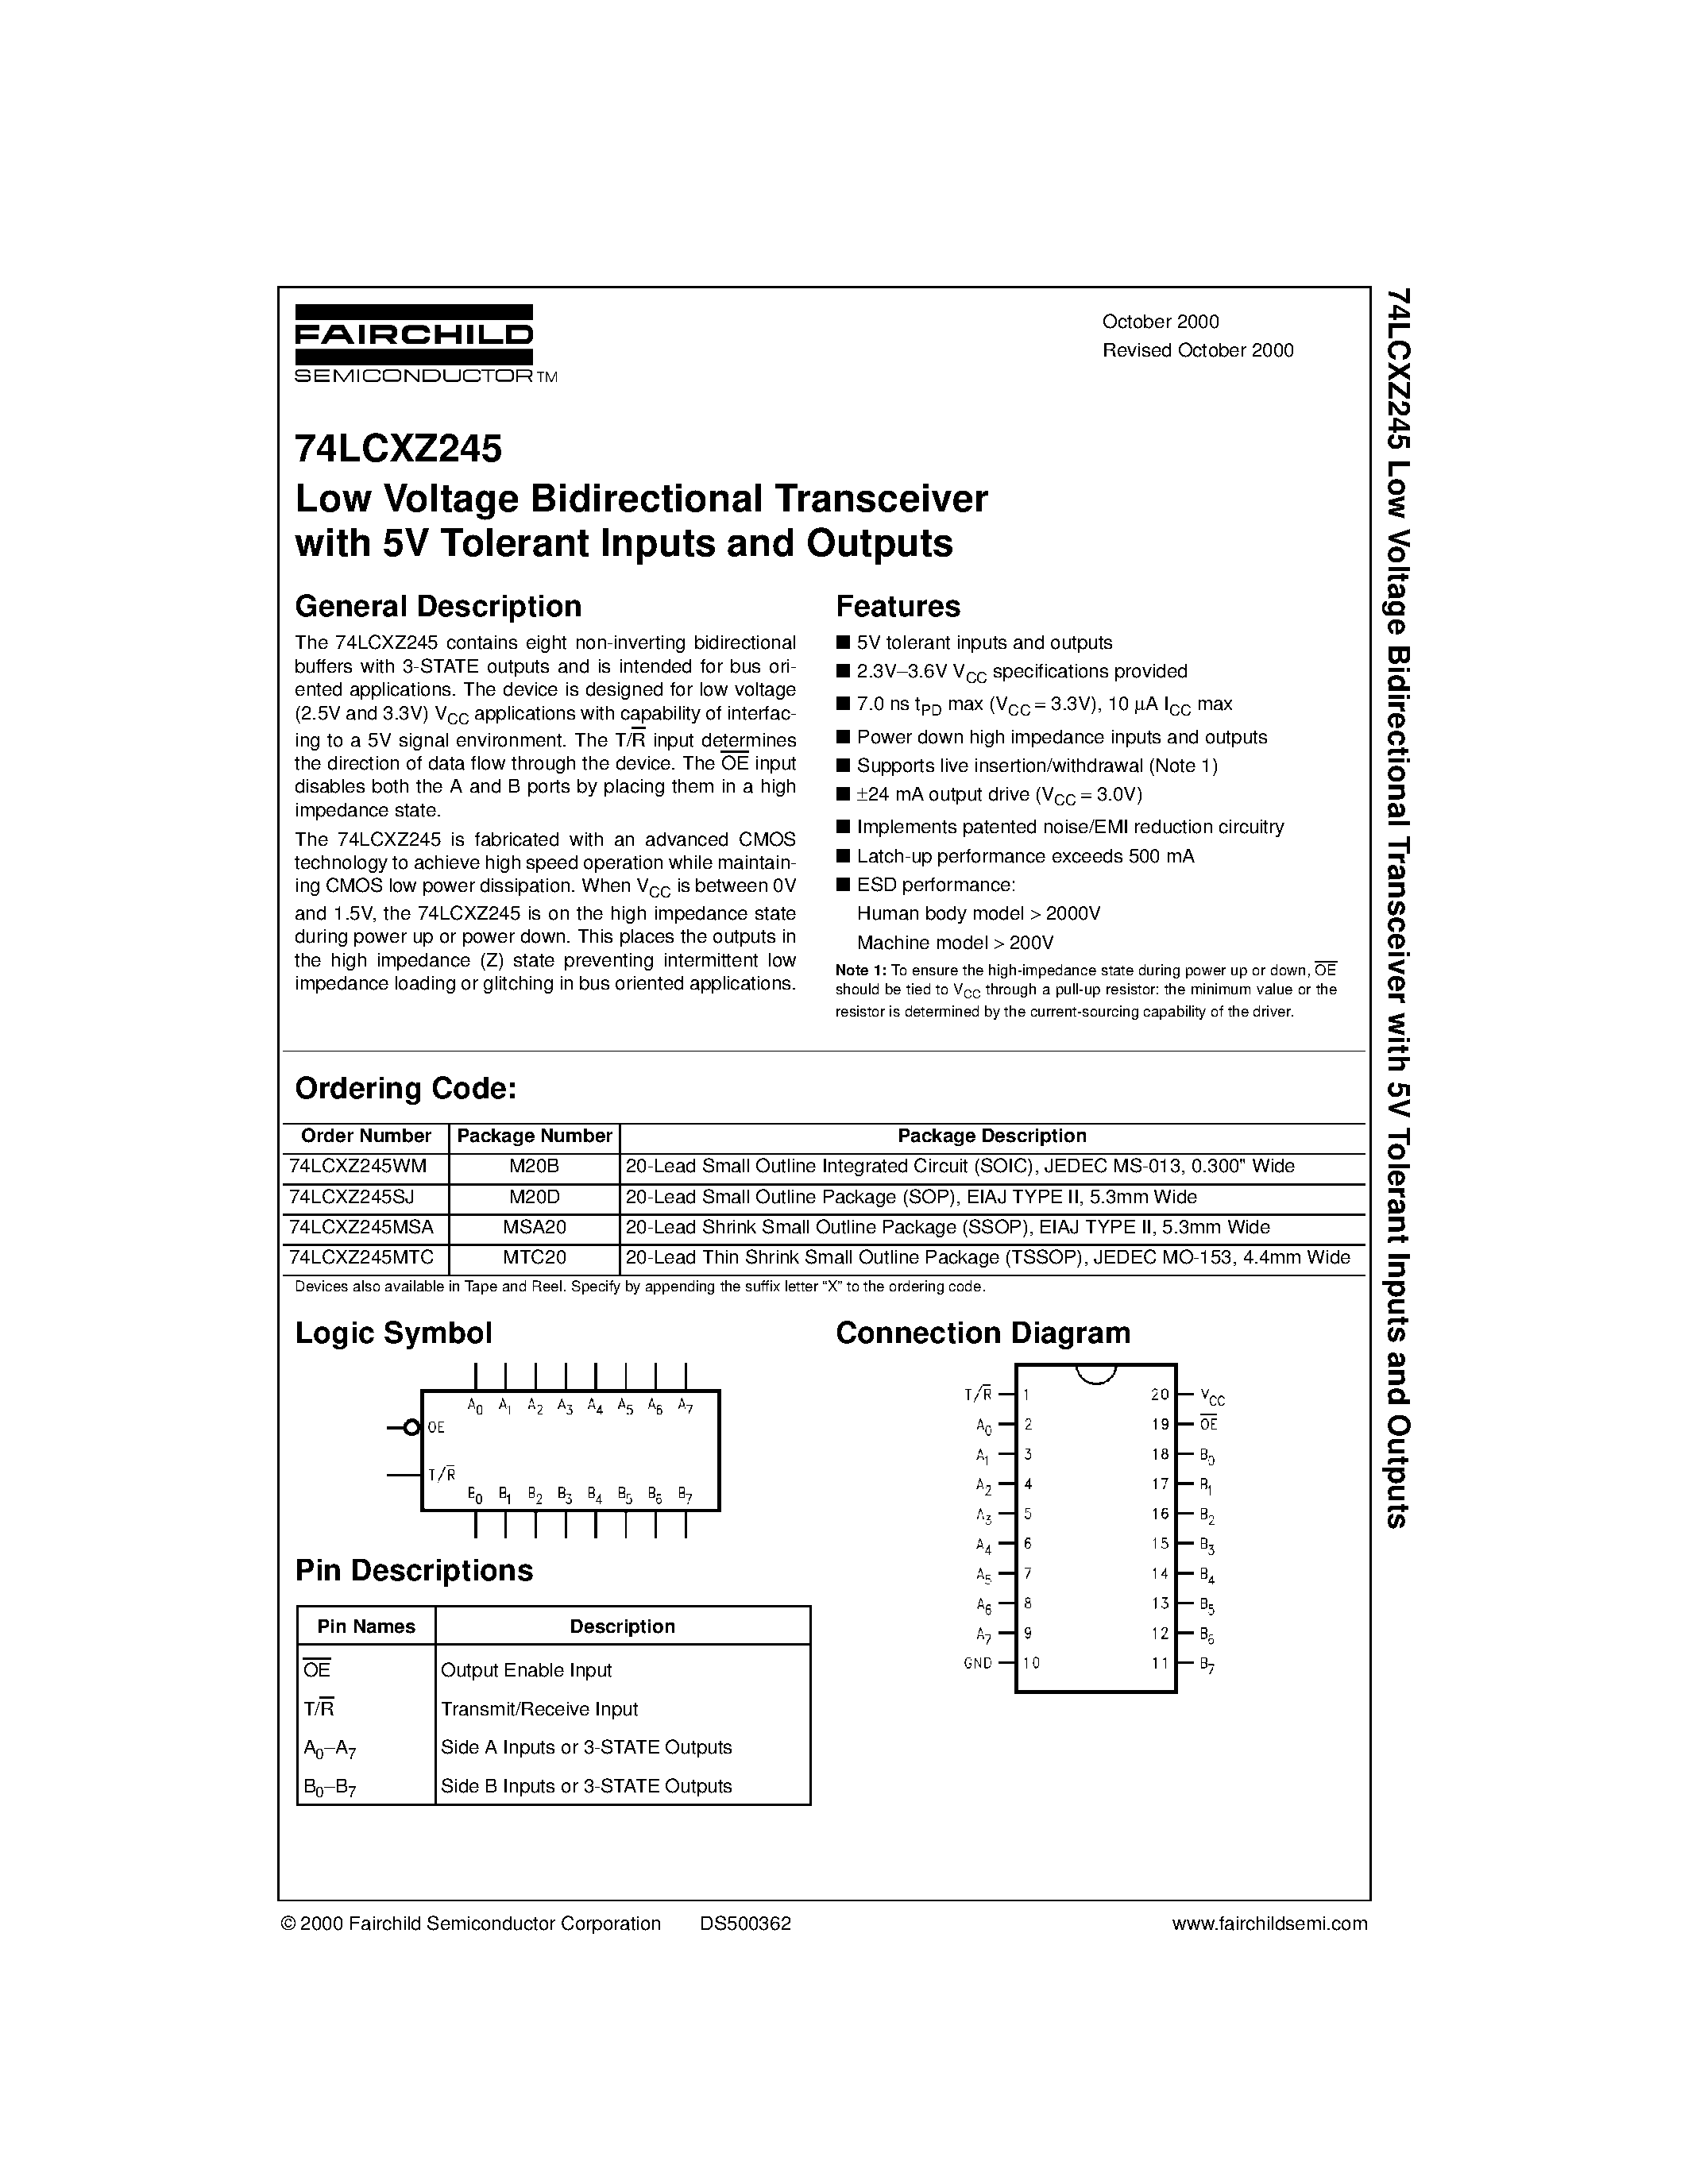 Datasheet 74LCXZ245WM - Low Voltage Bidirectional Transceiver with 5V Tolerant Inputs and Outputs page 1